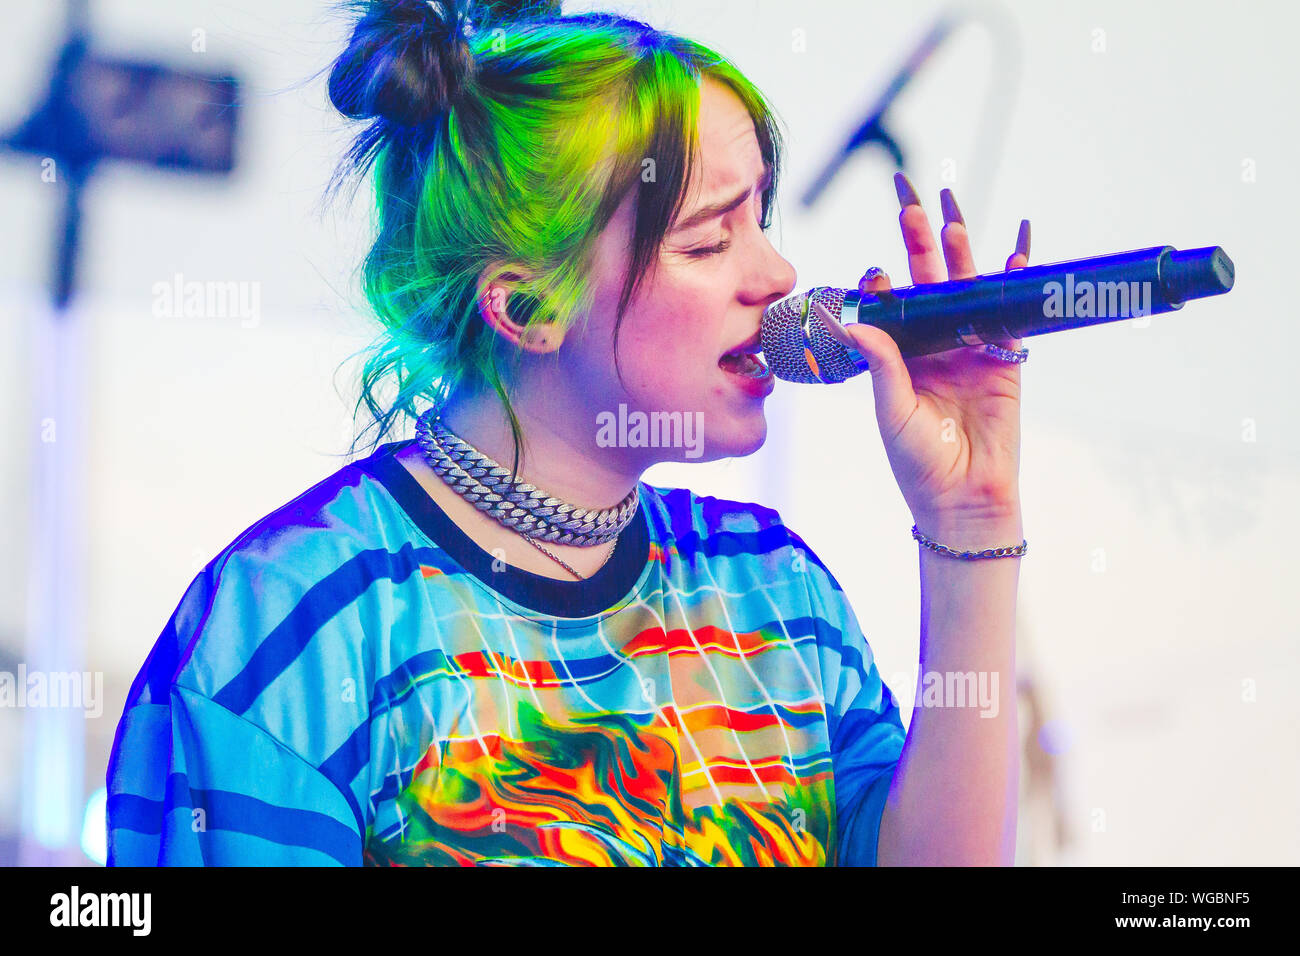 Milan, Italy. 31st Aug, 2019. Billie Eilish Pirate Baird O'Connell is an American singer-songwriter, model and dancer. Born and raised in Highland Park, Los Angeles, she began singing at a young age.In 2019 Billie Eilish has been one of the most hailed artist in the most important festivals all around the world. On the 31st of August Billie Eilish performed before Twenty One Pilots during the second and last day of the second edition of Milano Rocks, the festival organized by Live Nation and Indipendente Concerti in Milan. Credit: Pacific Press Agency/Alamy Live News Stock Photo